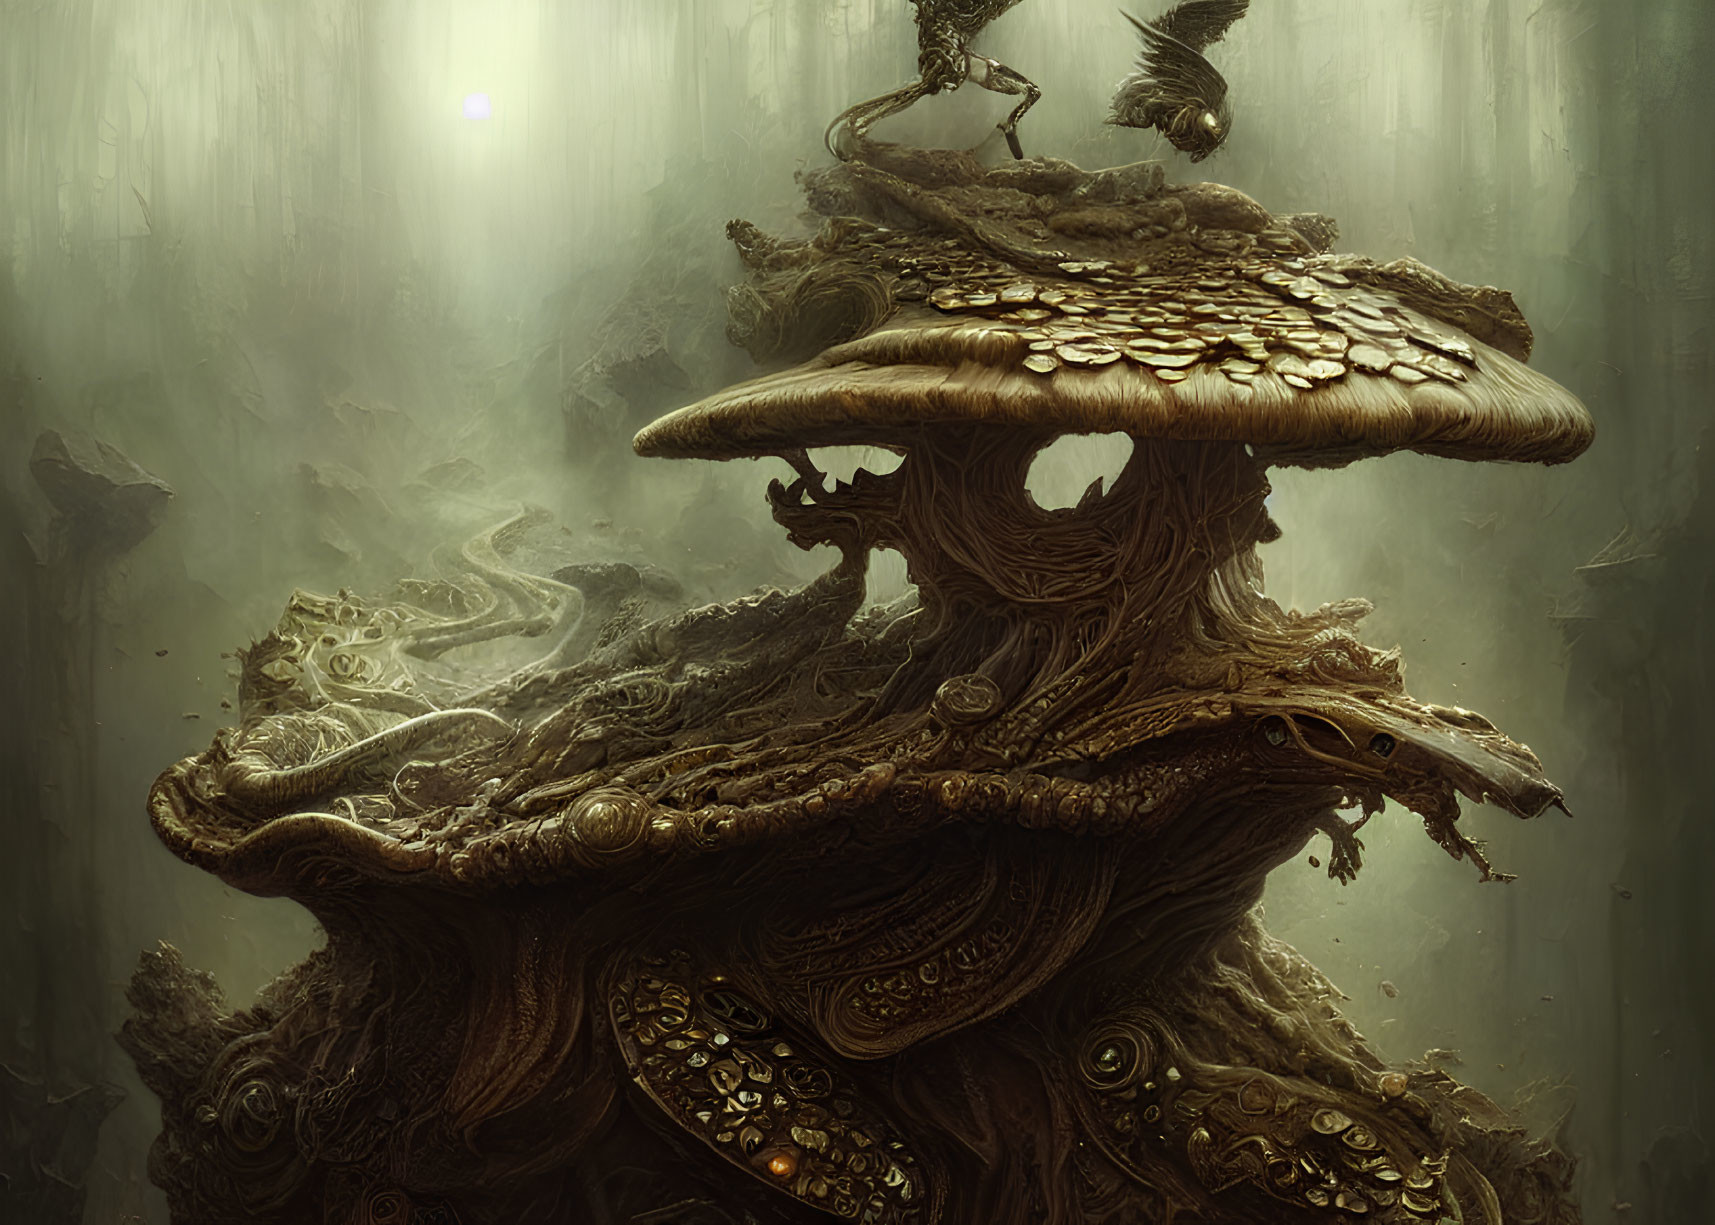 Ethereal forest scene with intricate mushroom structure and crow in misty surroundings